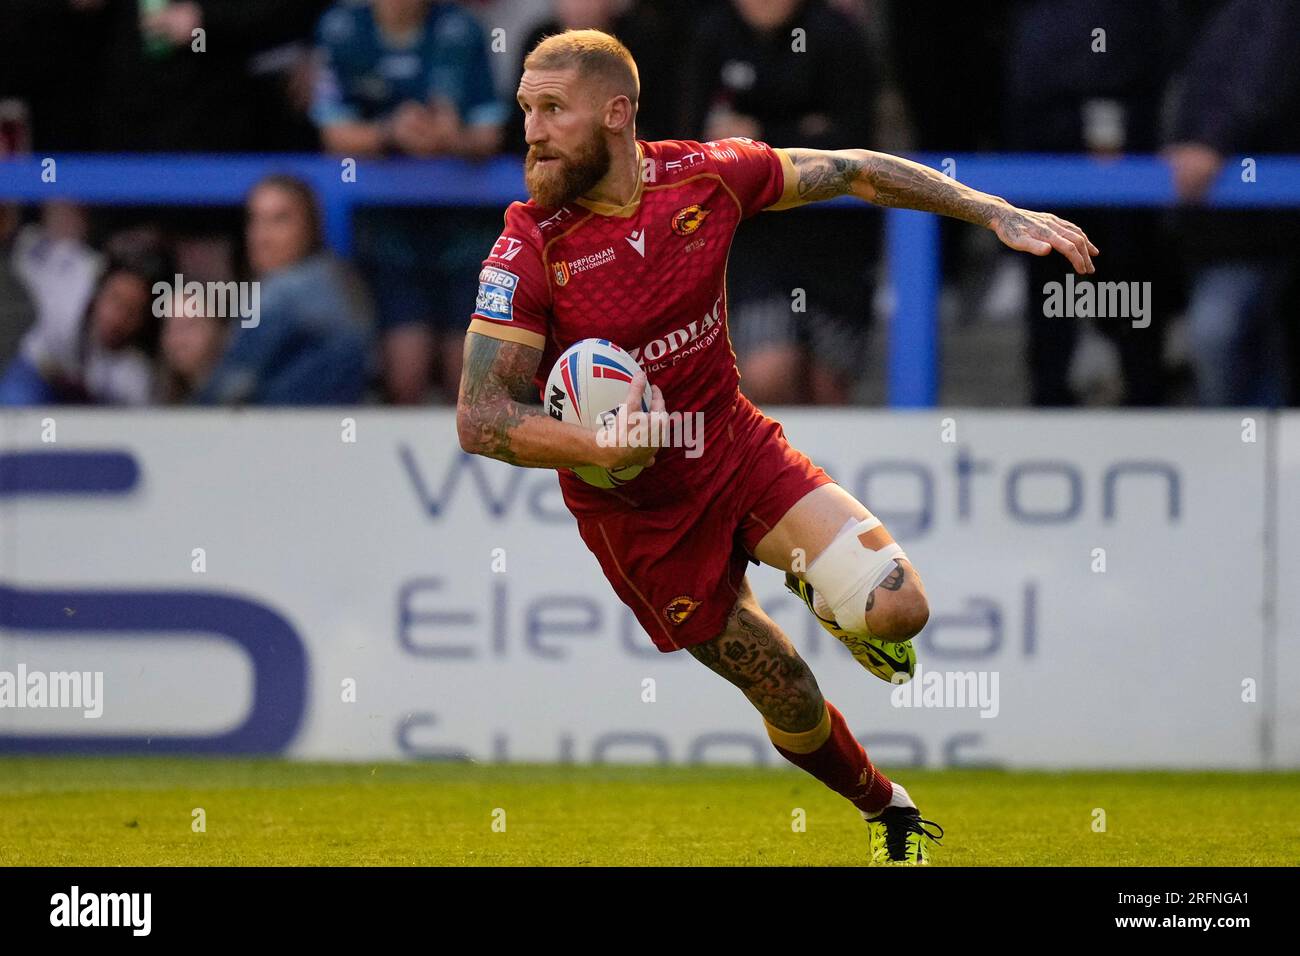 Sam Tomkins #29 of Catalans Dragons runs with the ball during the Betfred Super League Round 21 match Warrington Wolves vs Catalans Dragons at Halliwell Jones Stadium, Warrington, United Kingdom, 4th August 2023  (Photo by Steve Flynn/News Images) Stock Photo